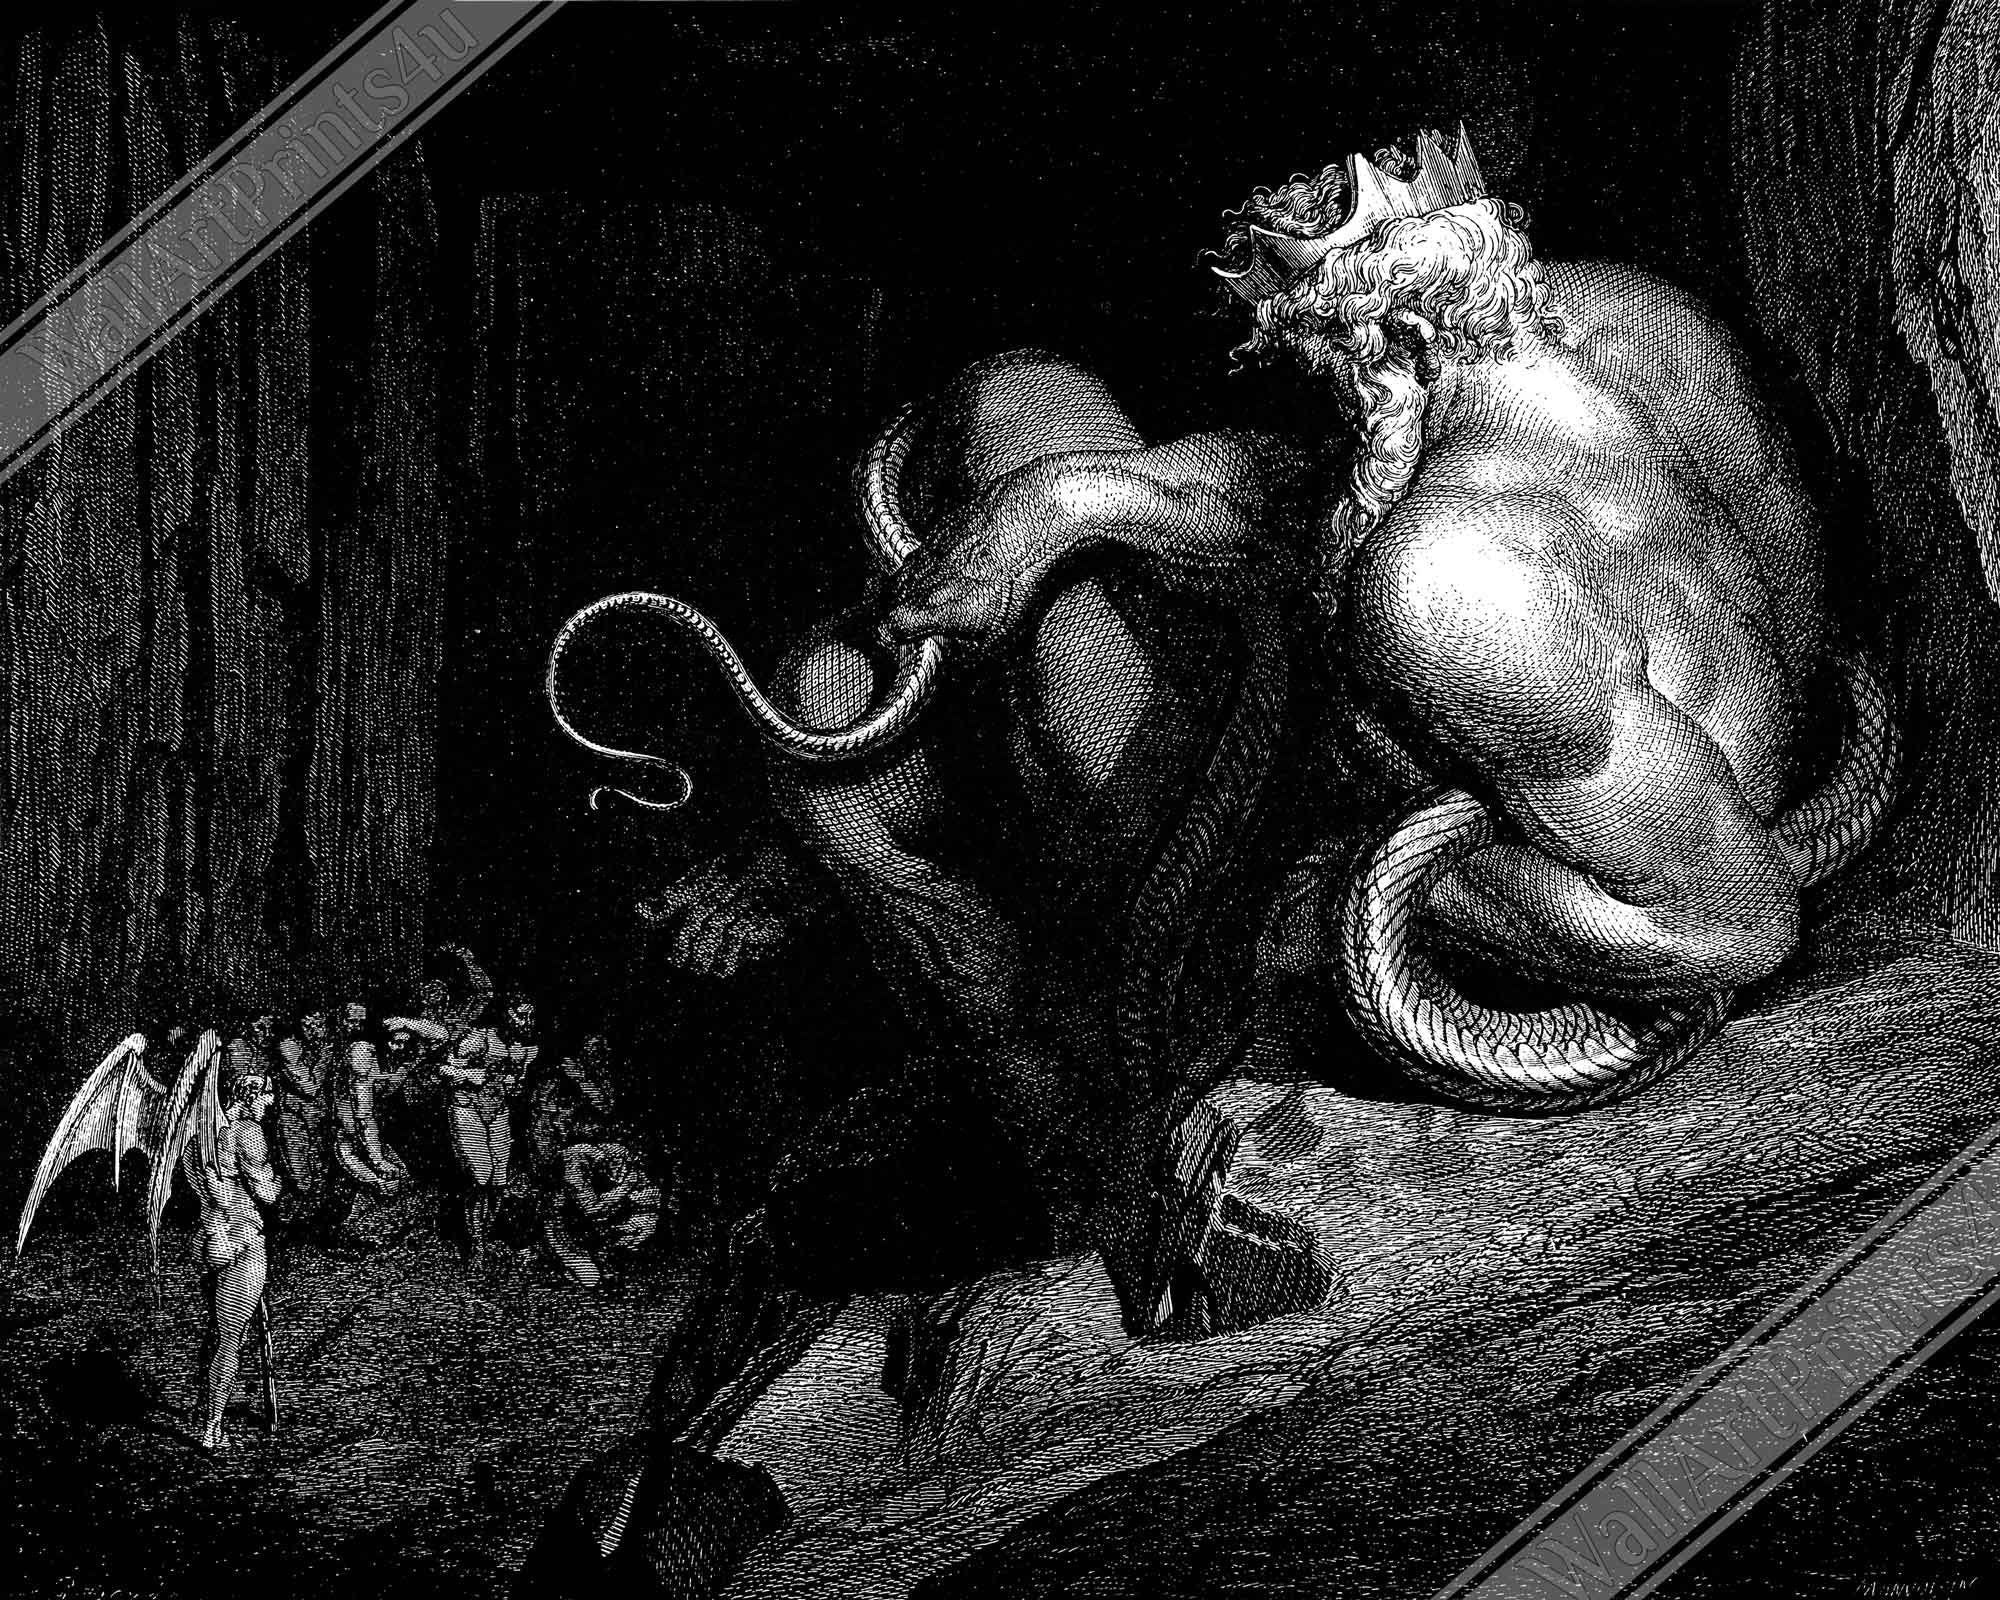 Divine Comedy Poster - Demon King Minos With His Serpent Tail - Gustave Dore Illustration - WallArtPrints4U